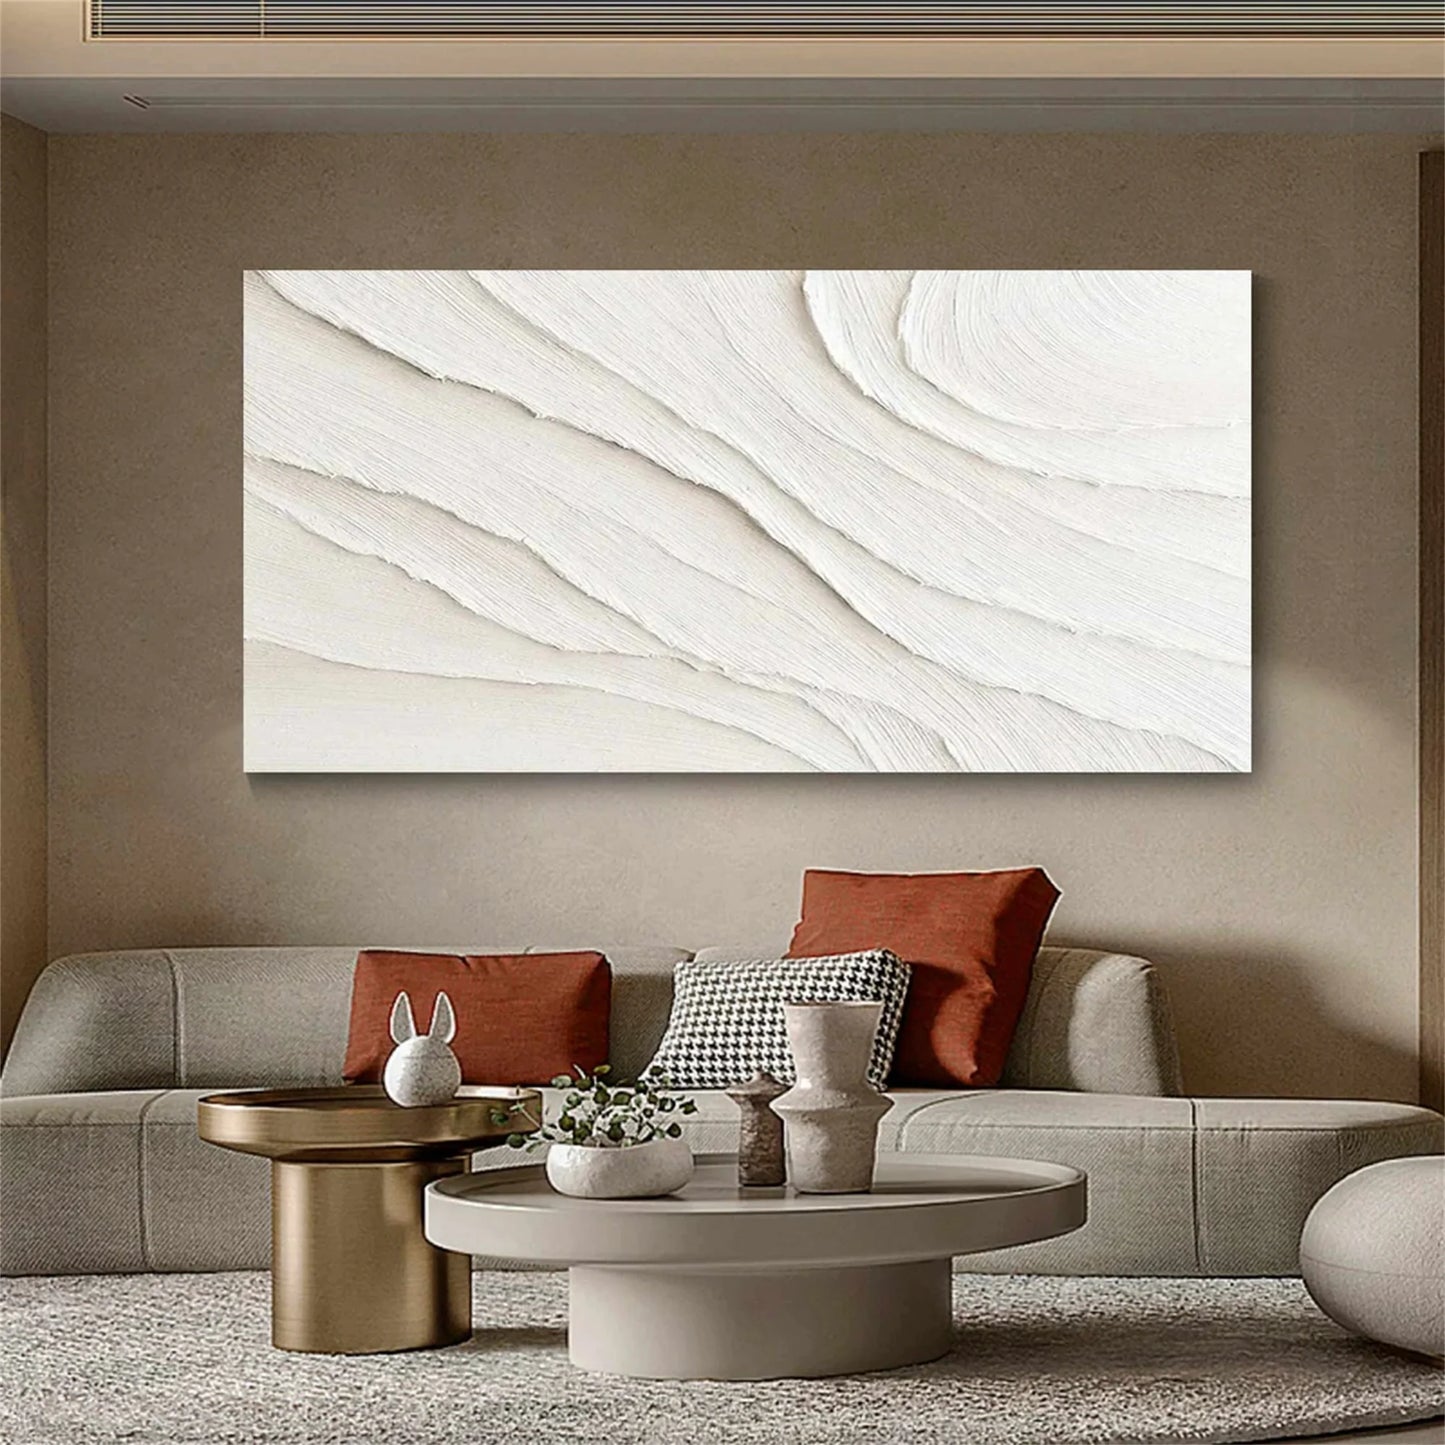 Minimalistic Balance Canvas Painting "Textures of Time"